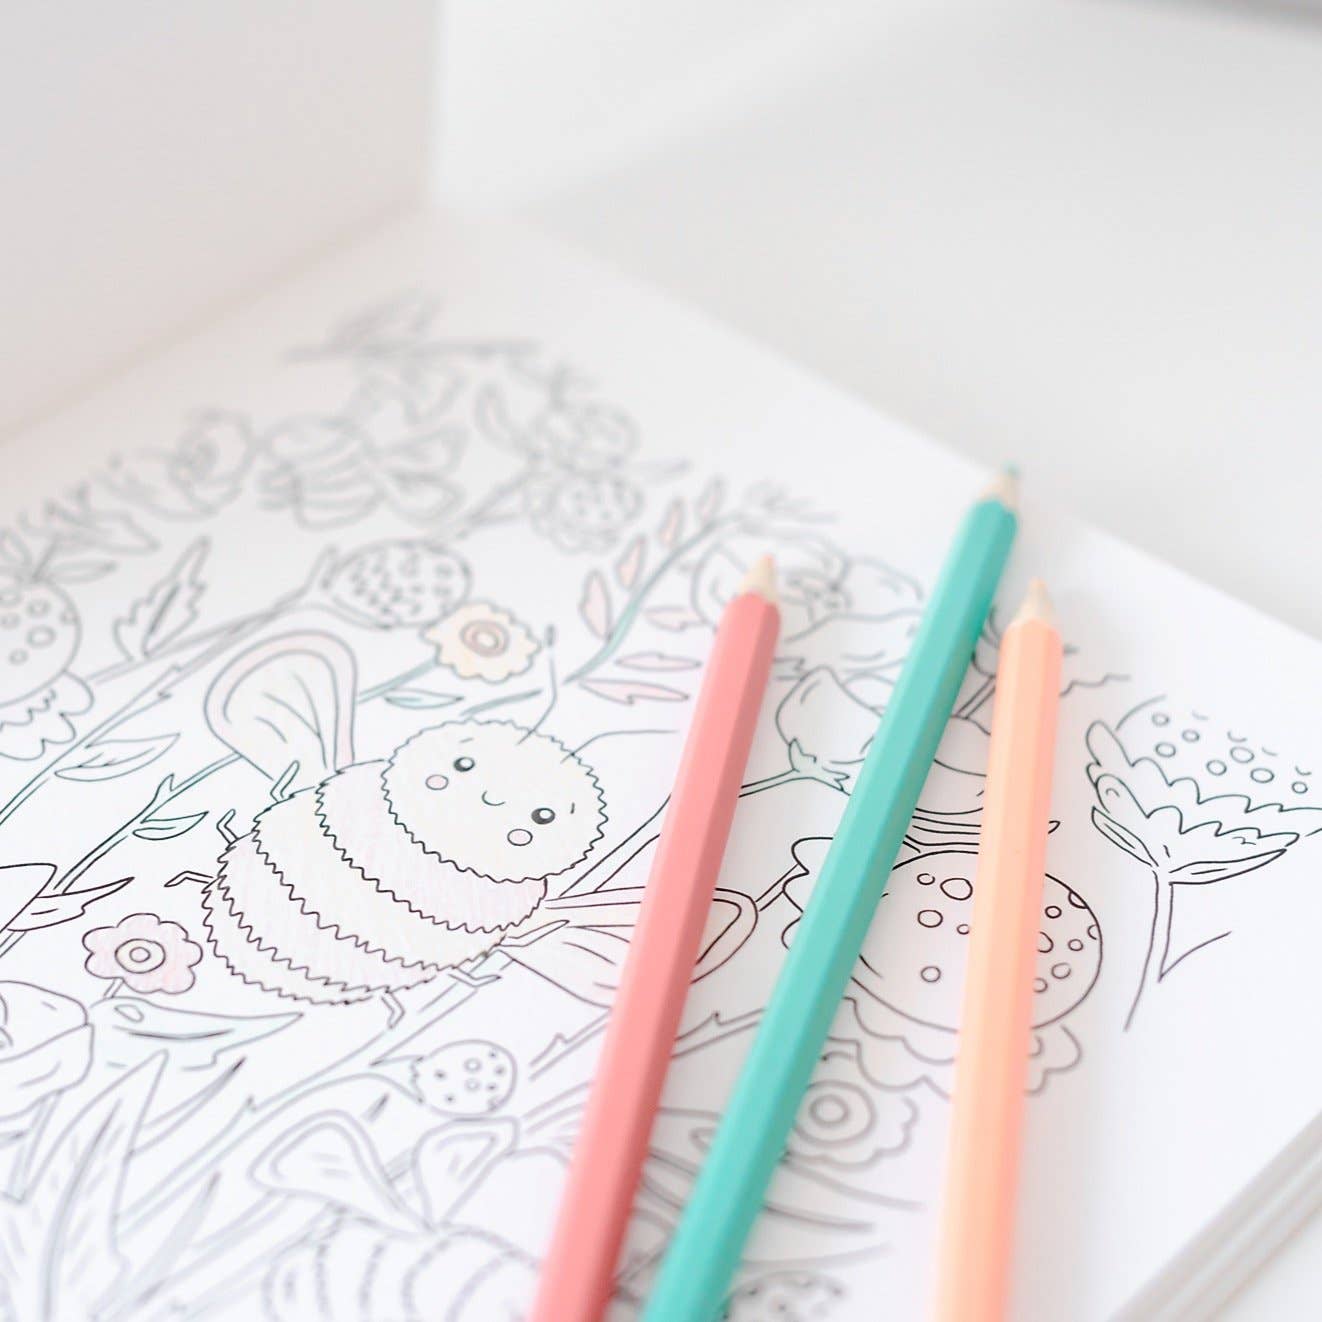 ABCs of Mindfulness: Colouring